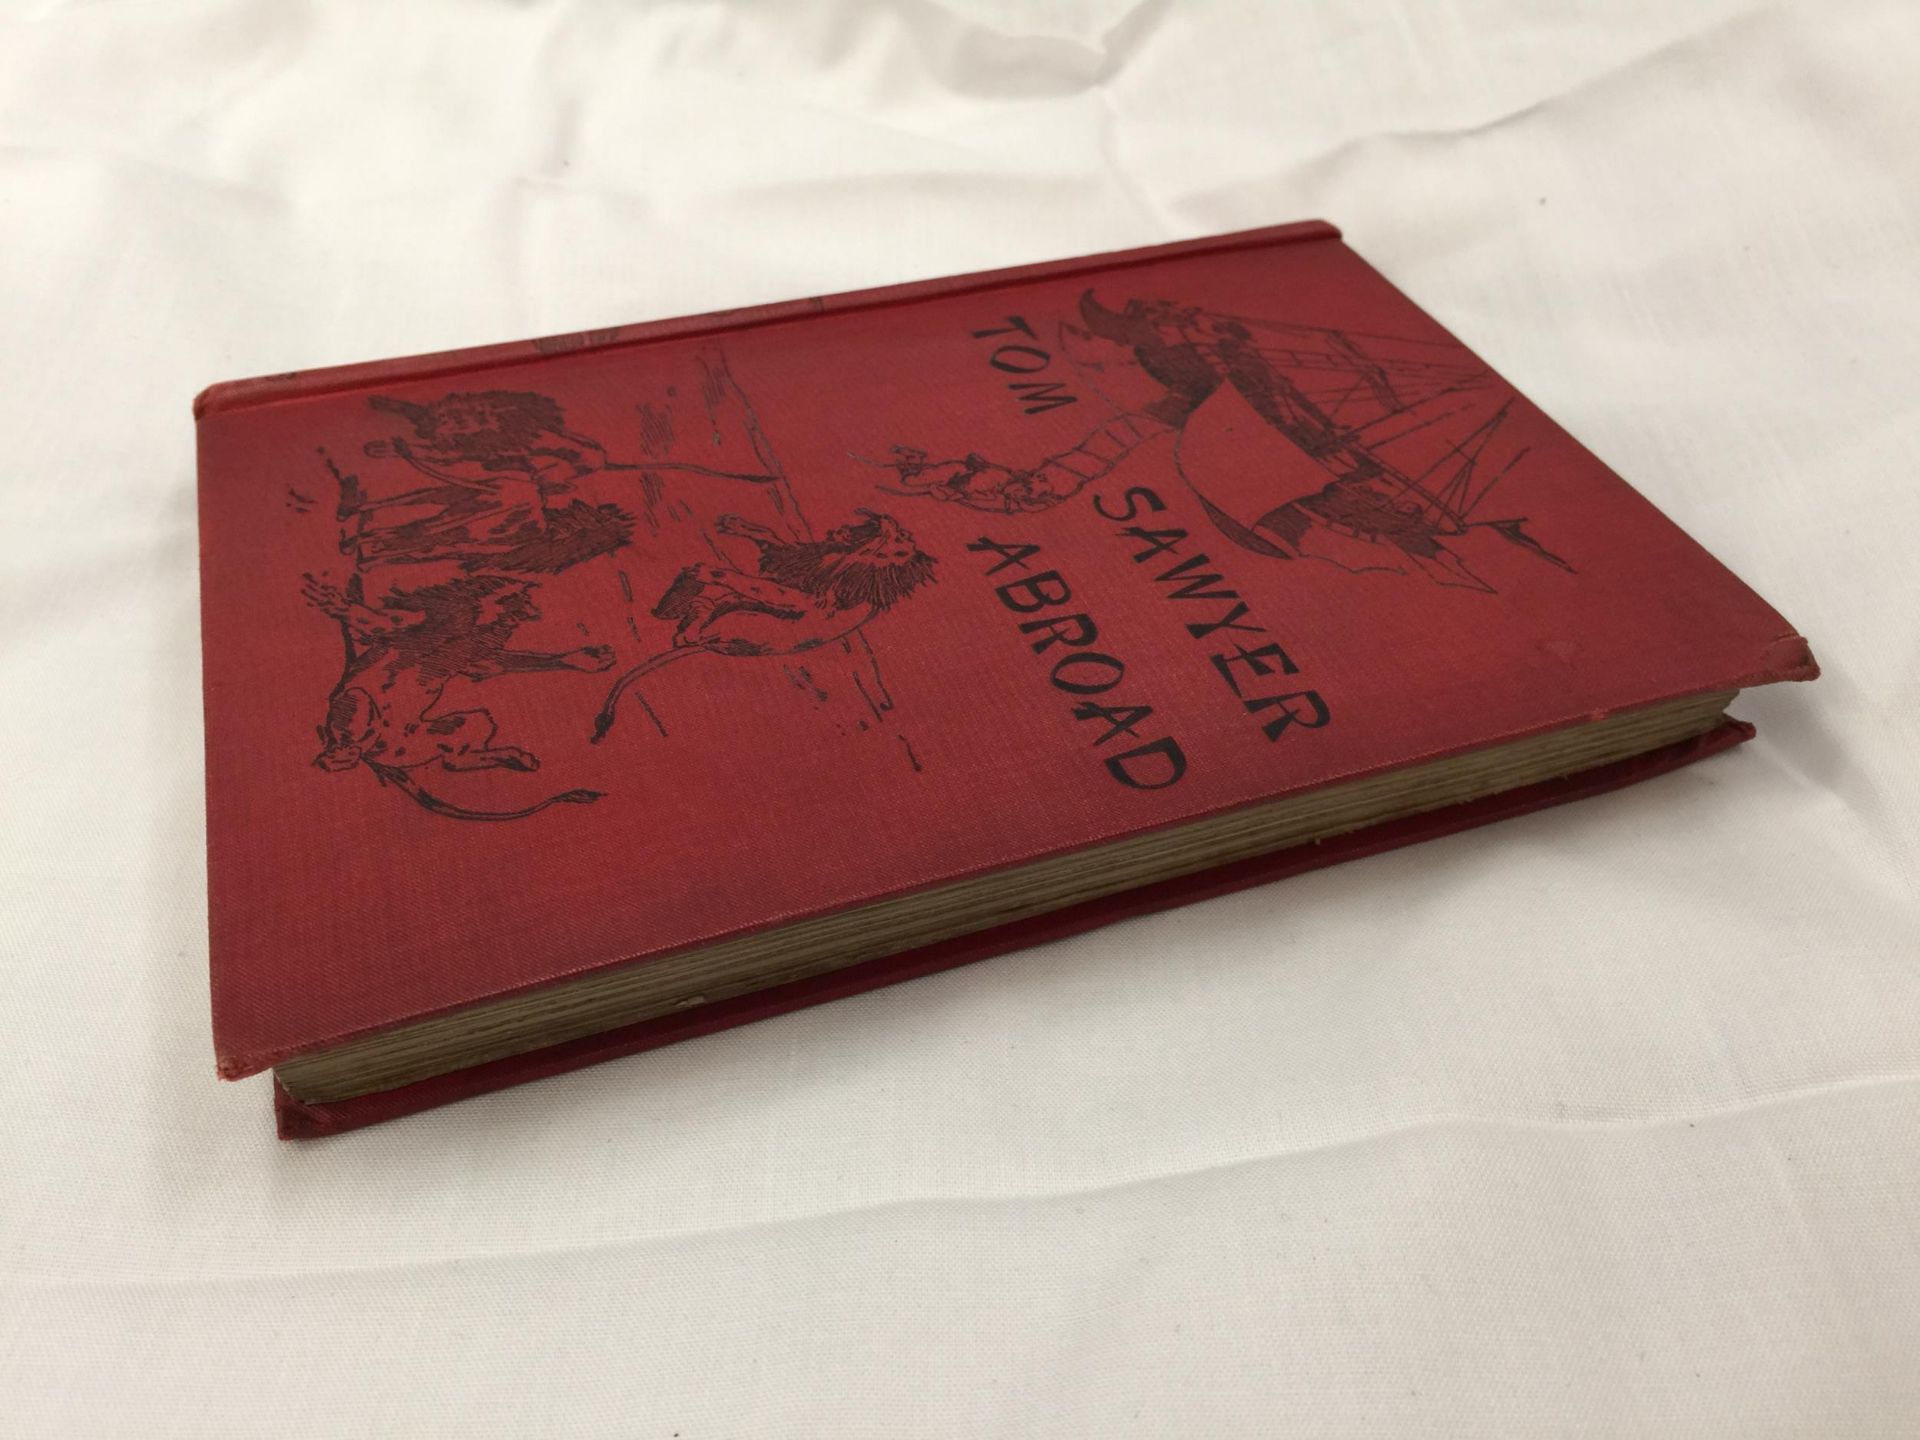 A FIRST EDITION TOM SAWYER ABROAD HARDBACK BY MARK TWAIN - PUBLISHED 1894 BY CHATTO & WINDUS - Image 3 of 7